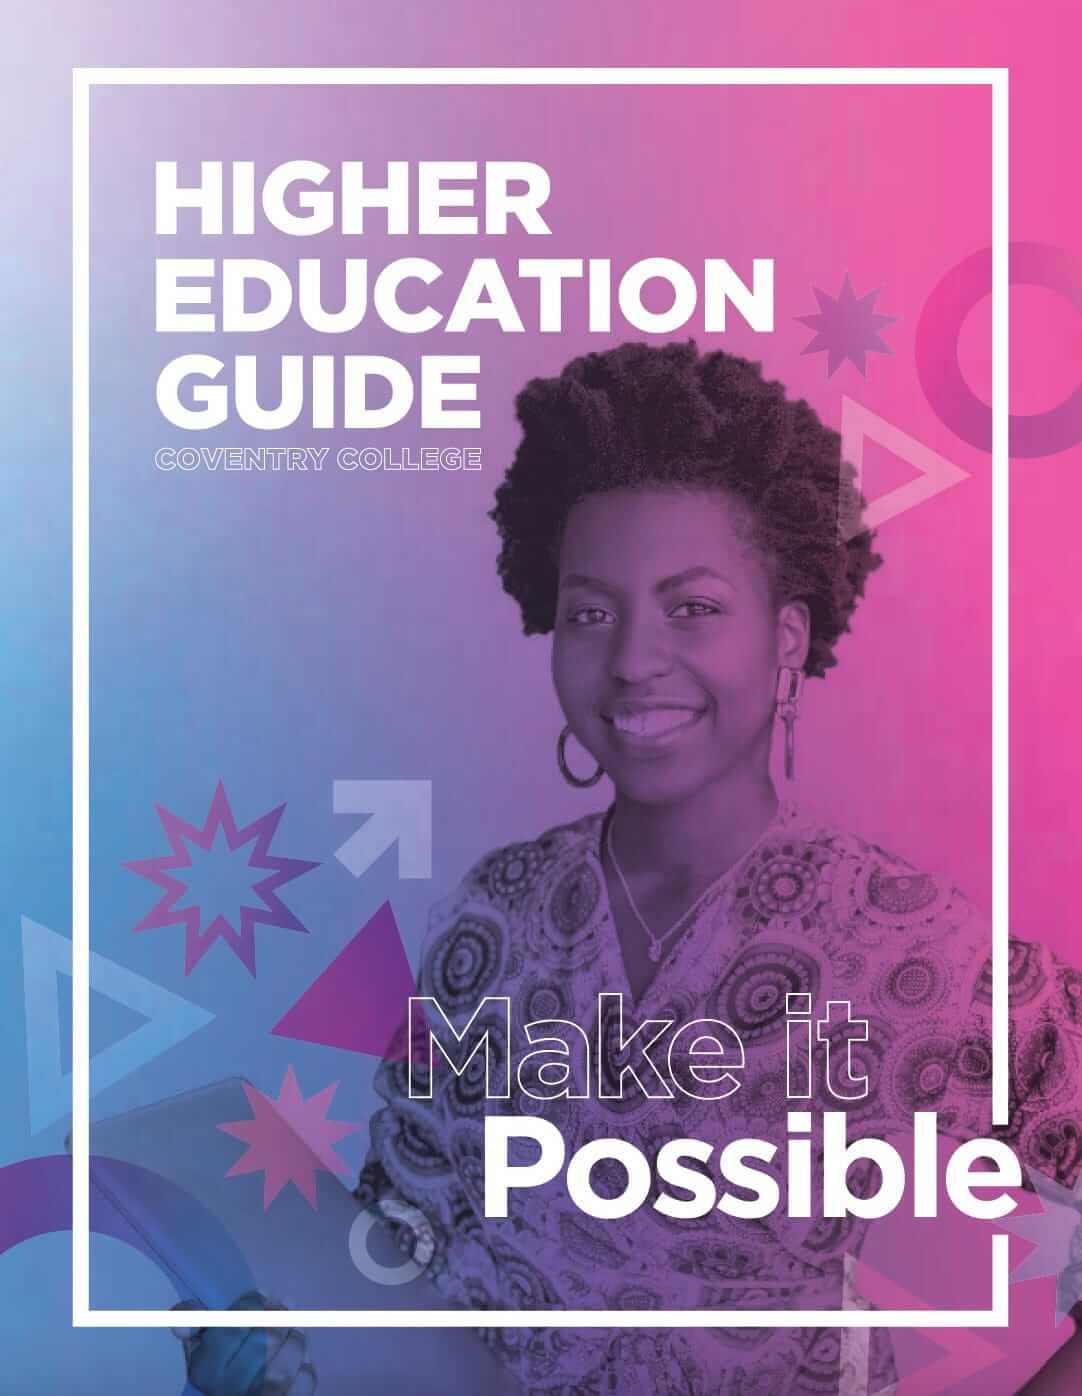 Coventry college higher education guide cover